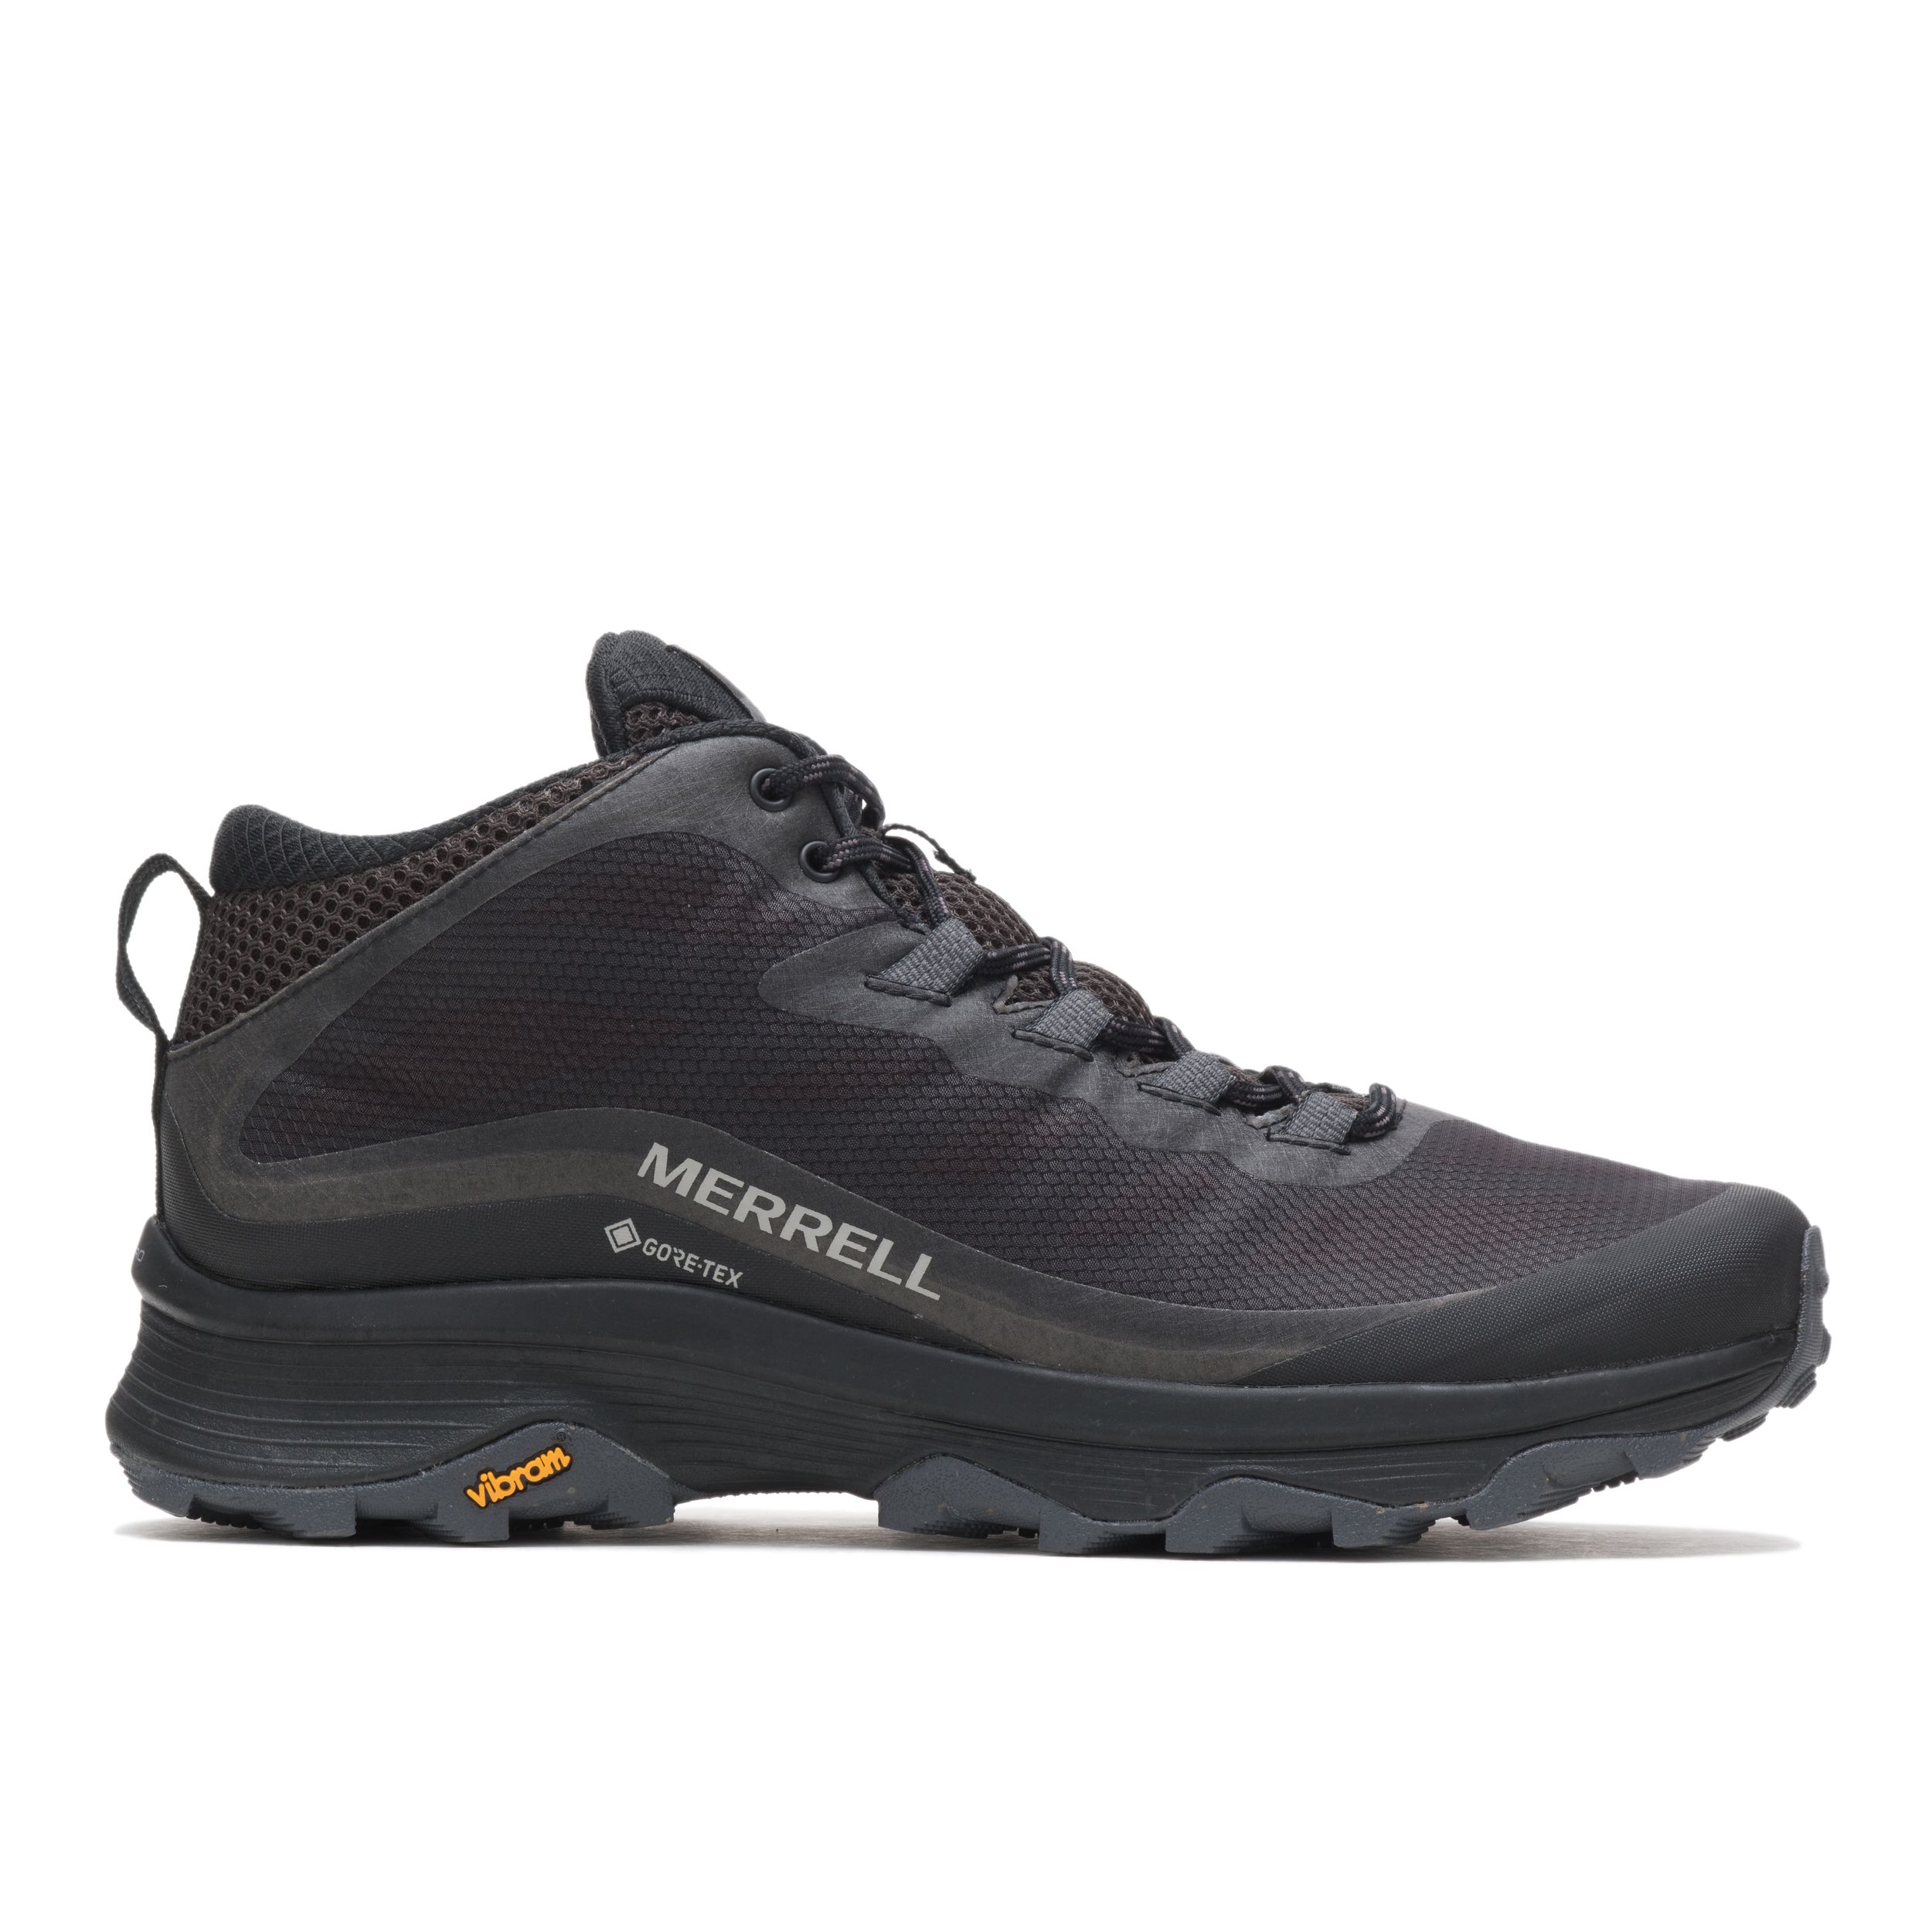 Image of Merrell Men's Moab Speed Mid Gore-Tex Hiking Shoes